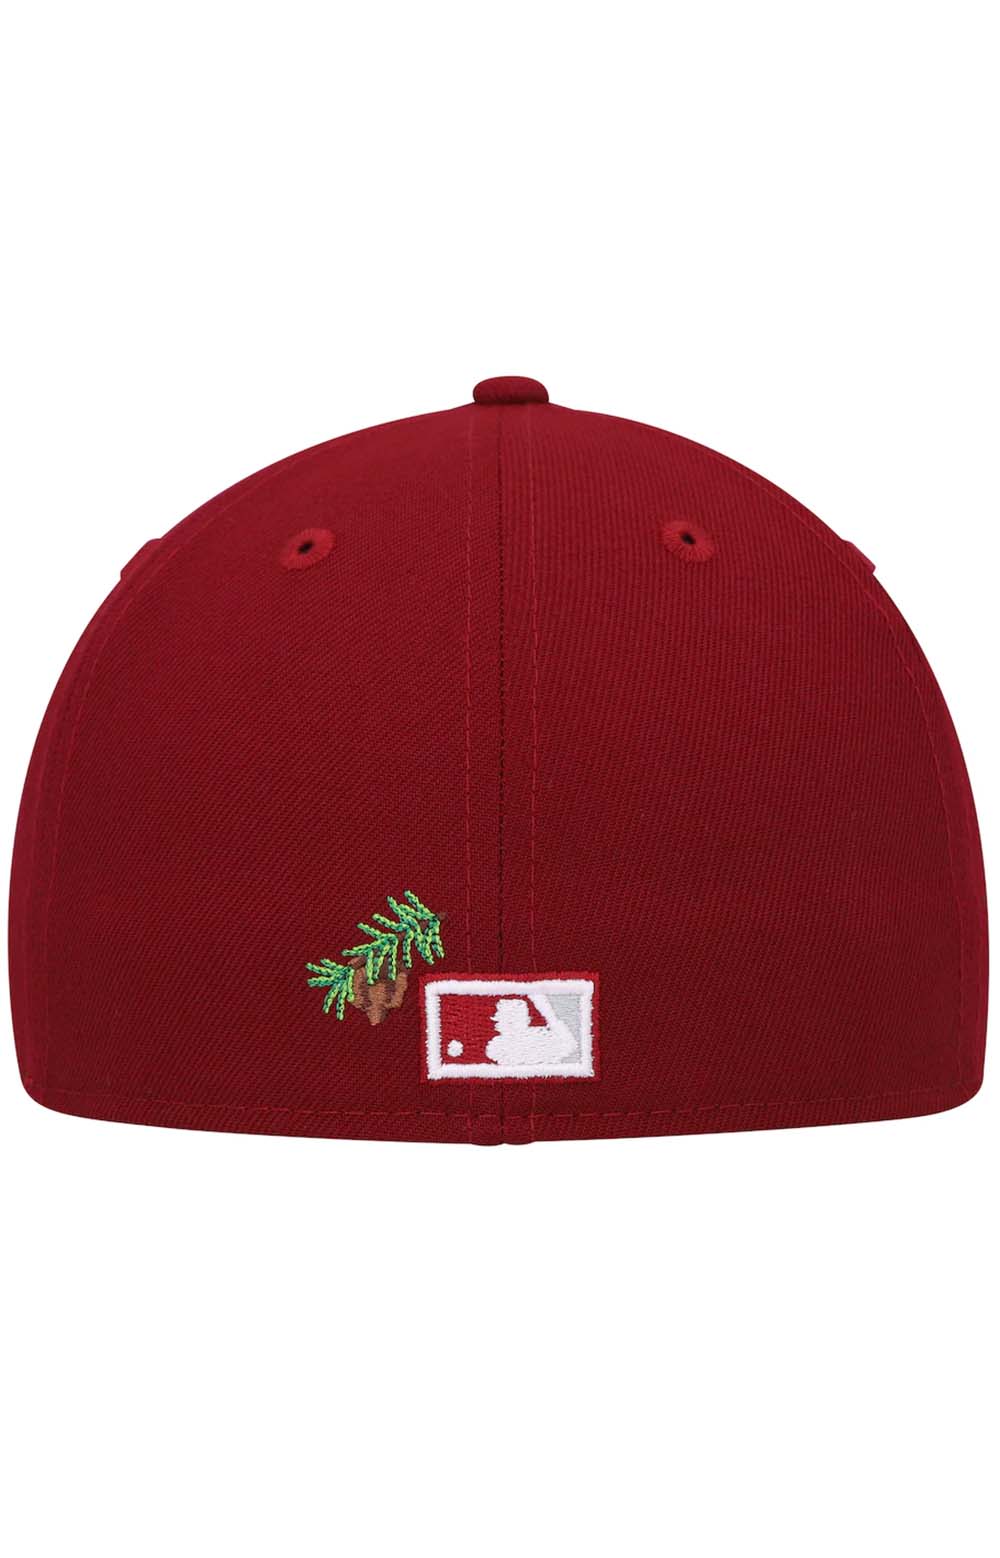 Philadelphia Phillies Stateview 59FIFTY Fitted Hat